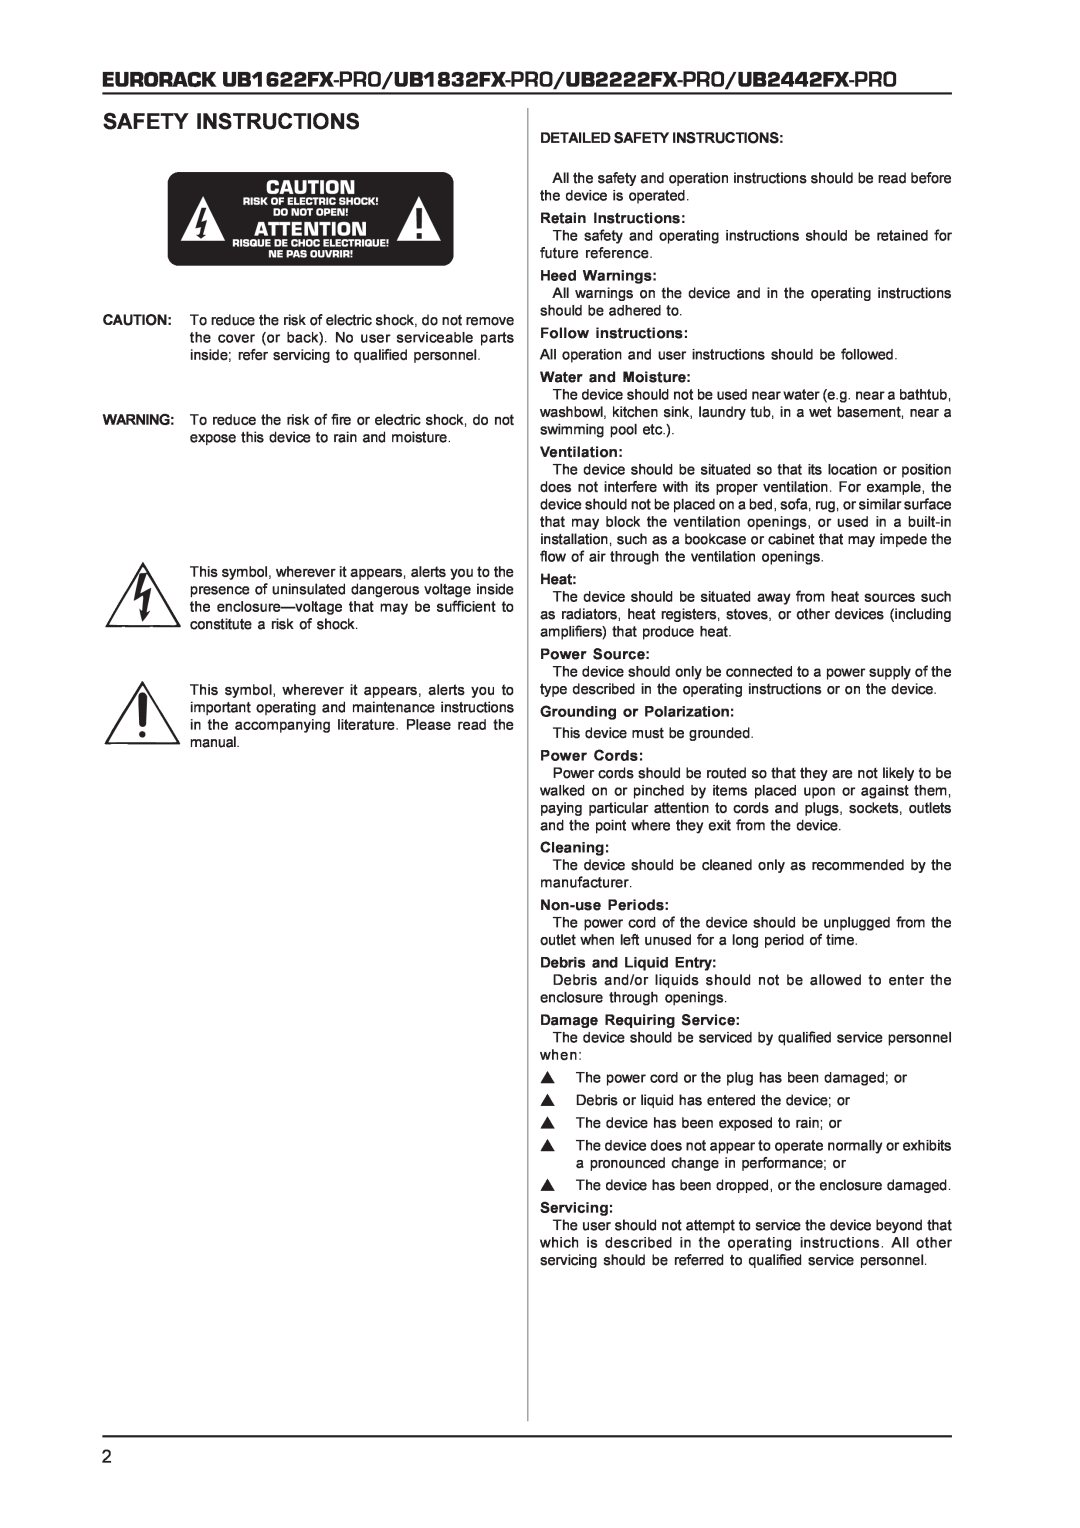 Behringer UB1622FX-PRO, UB2442FX-PRO, UB2222FX-PRO, UB1832FX-PRO manual Safety Instructions 